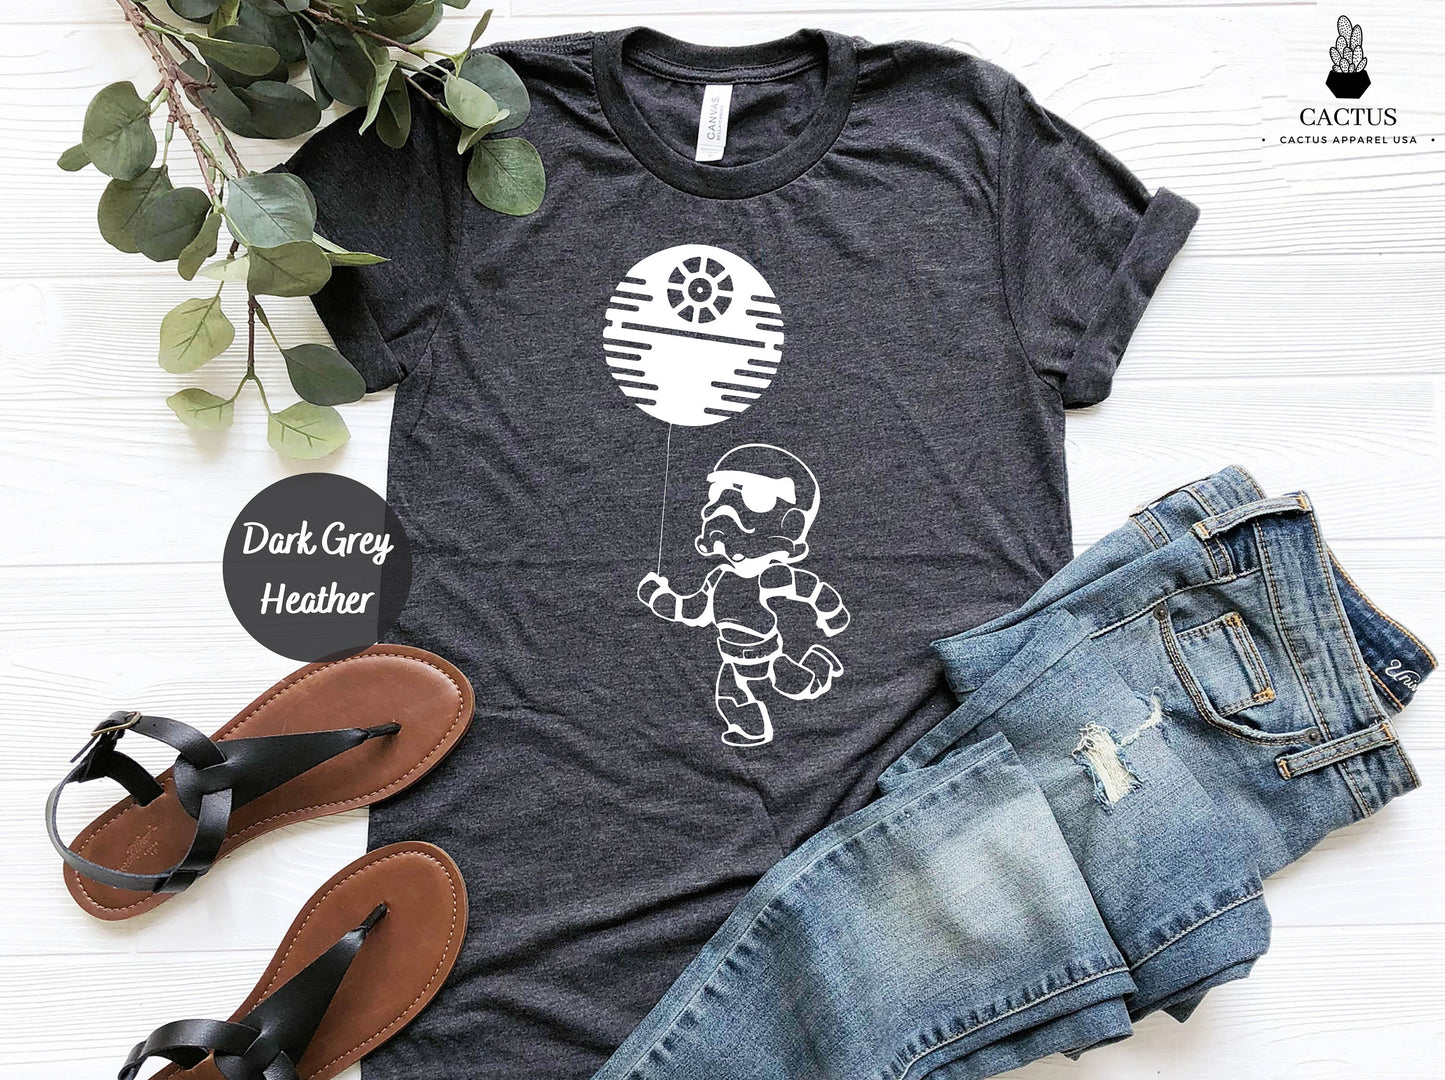 Baby Stormtrooper With Death Star Balloon Shirt, Star Wars Lover Shirt, Star Wars Matching Shirt, Star Wars Gift Shirt